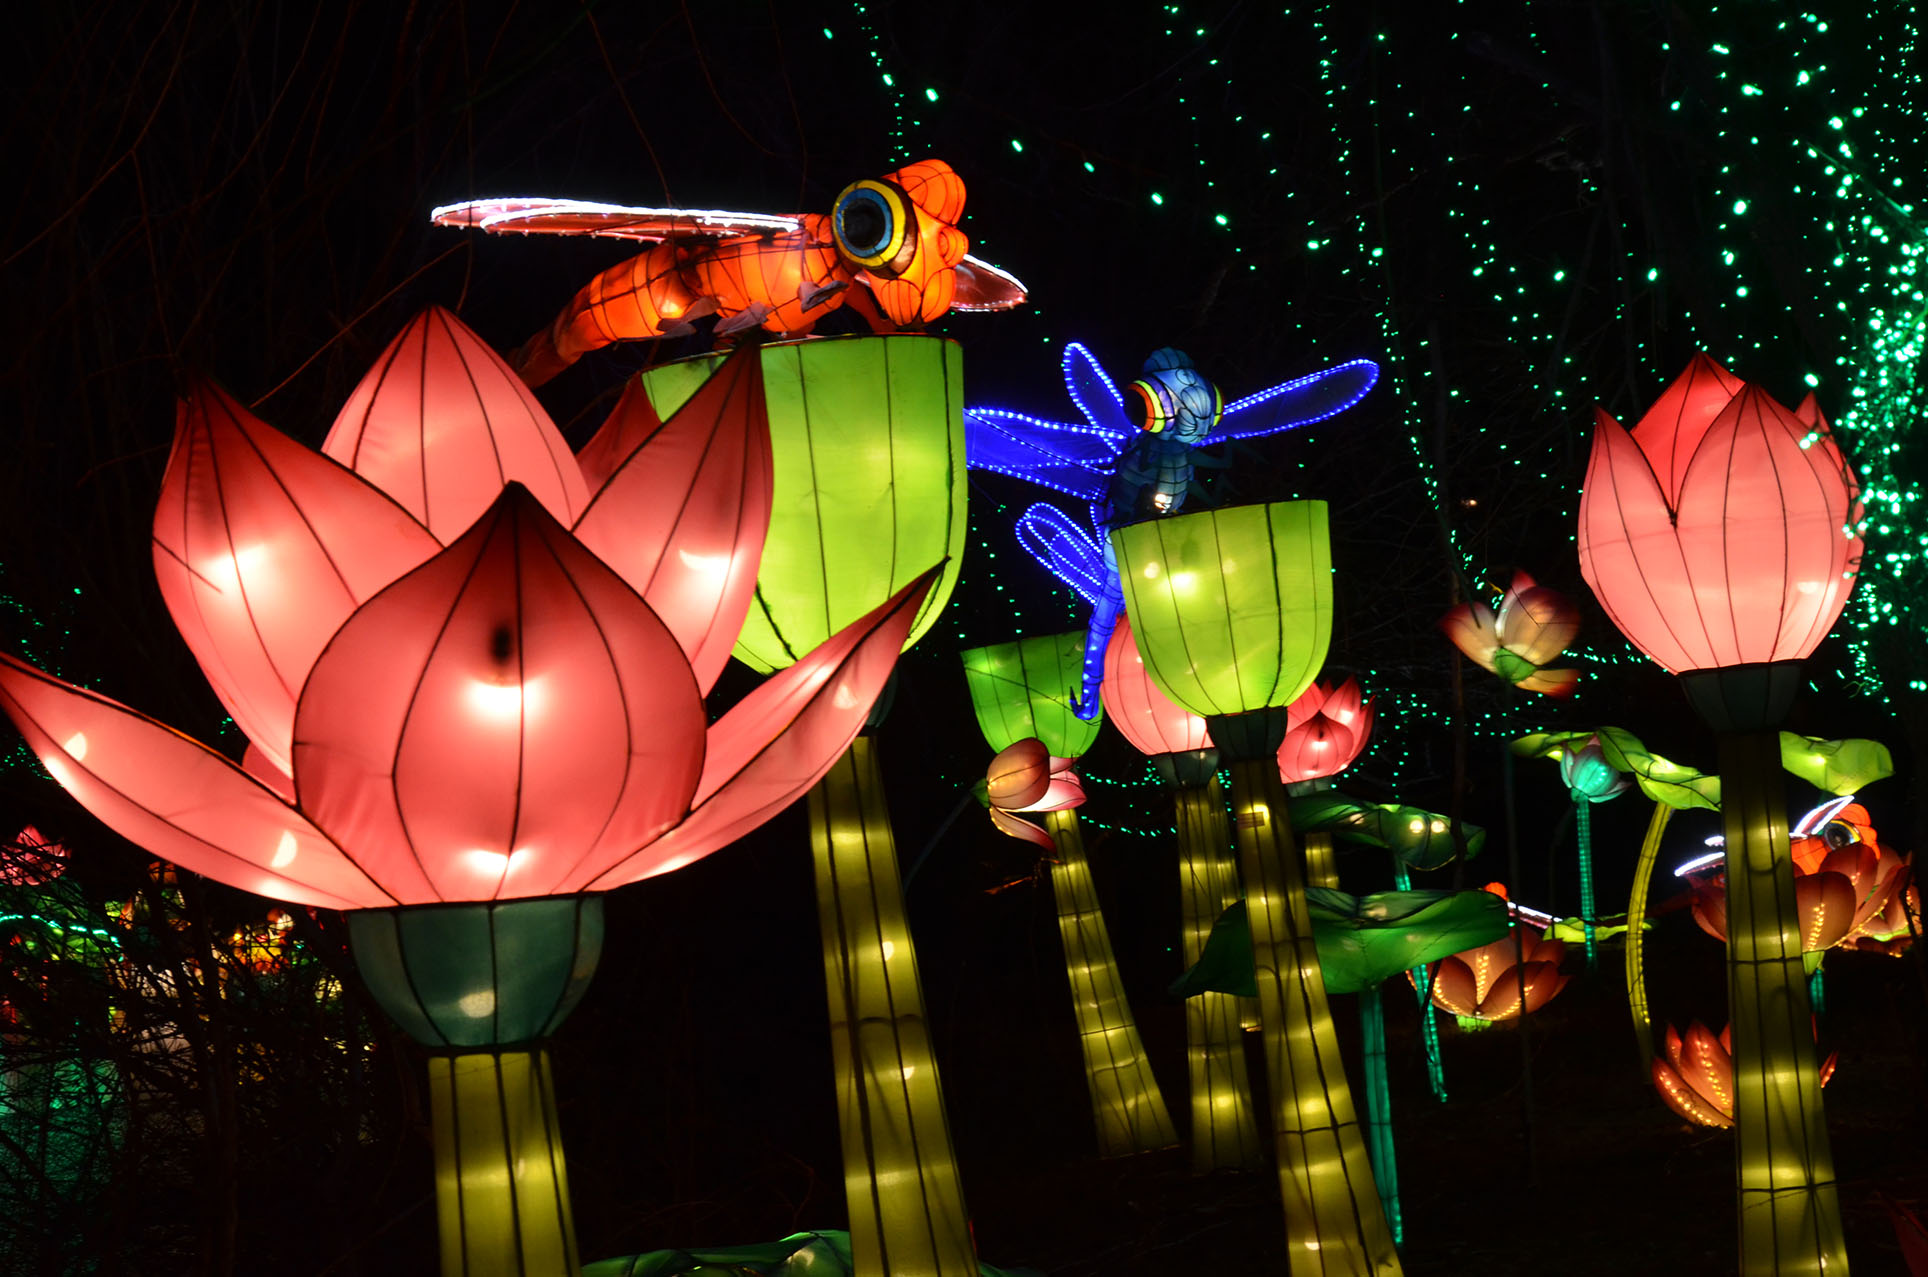 Chinese Lantern Festival’s “The Wild” Exhibit Opens this Weekend with